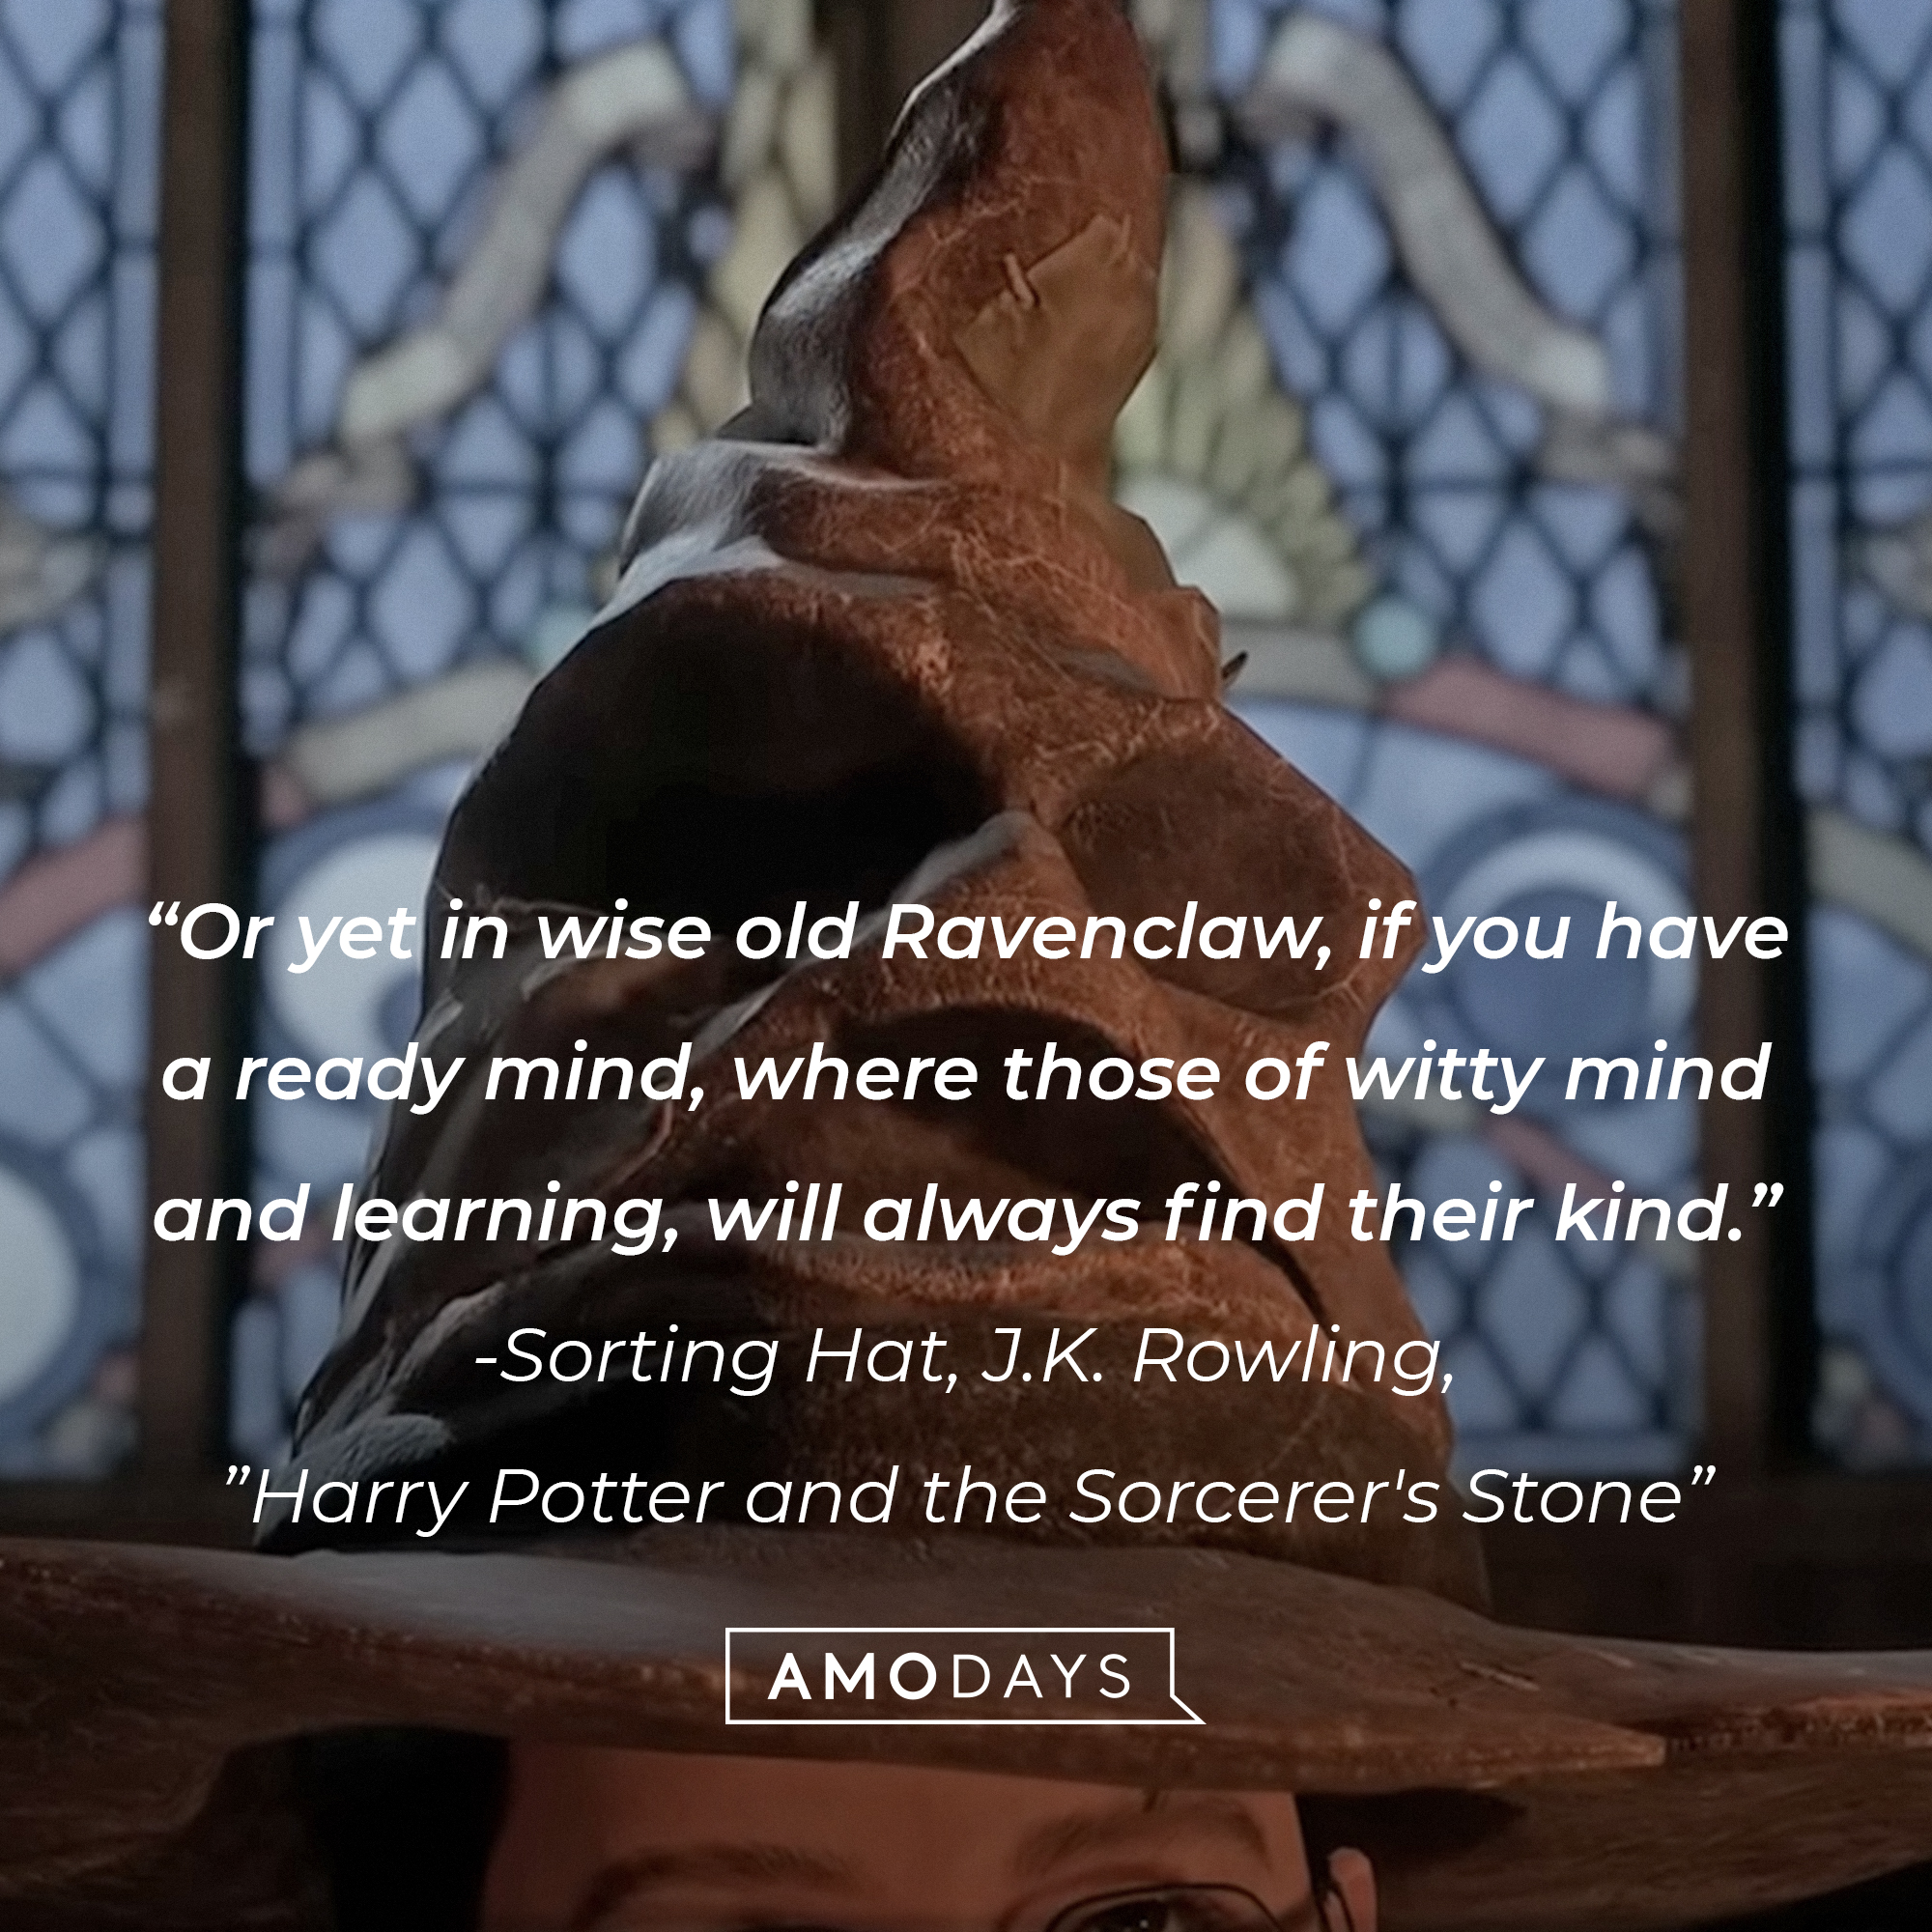 A quote by the Sorting Hat from J.K. Rowling’s “Harry Potter and the Sorcerer’s Stone" | Source:  youtube.com/HogwartsLegacy